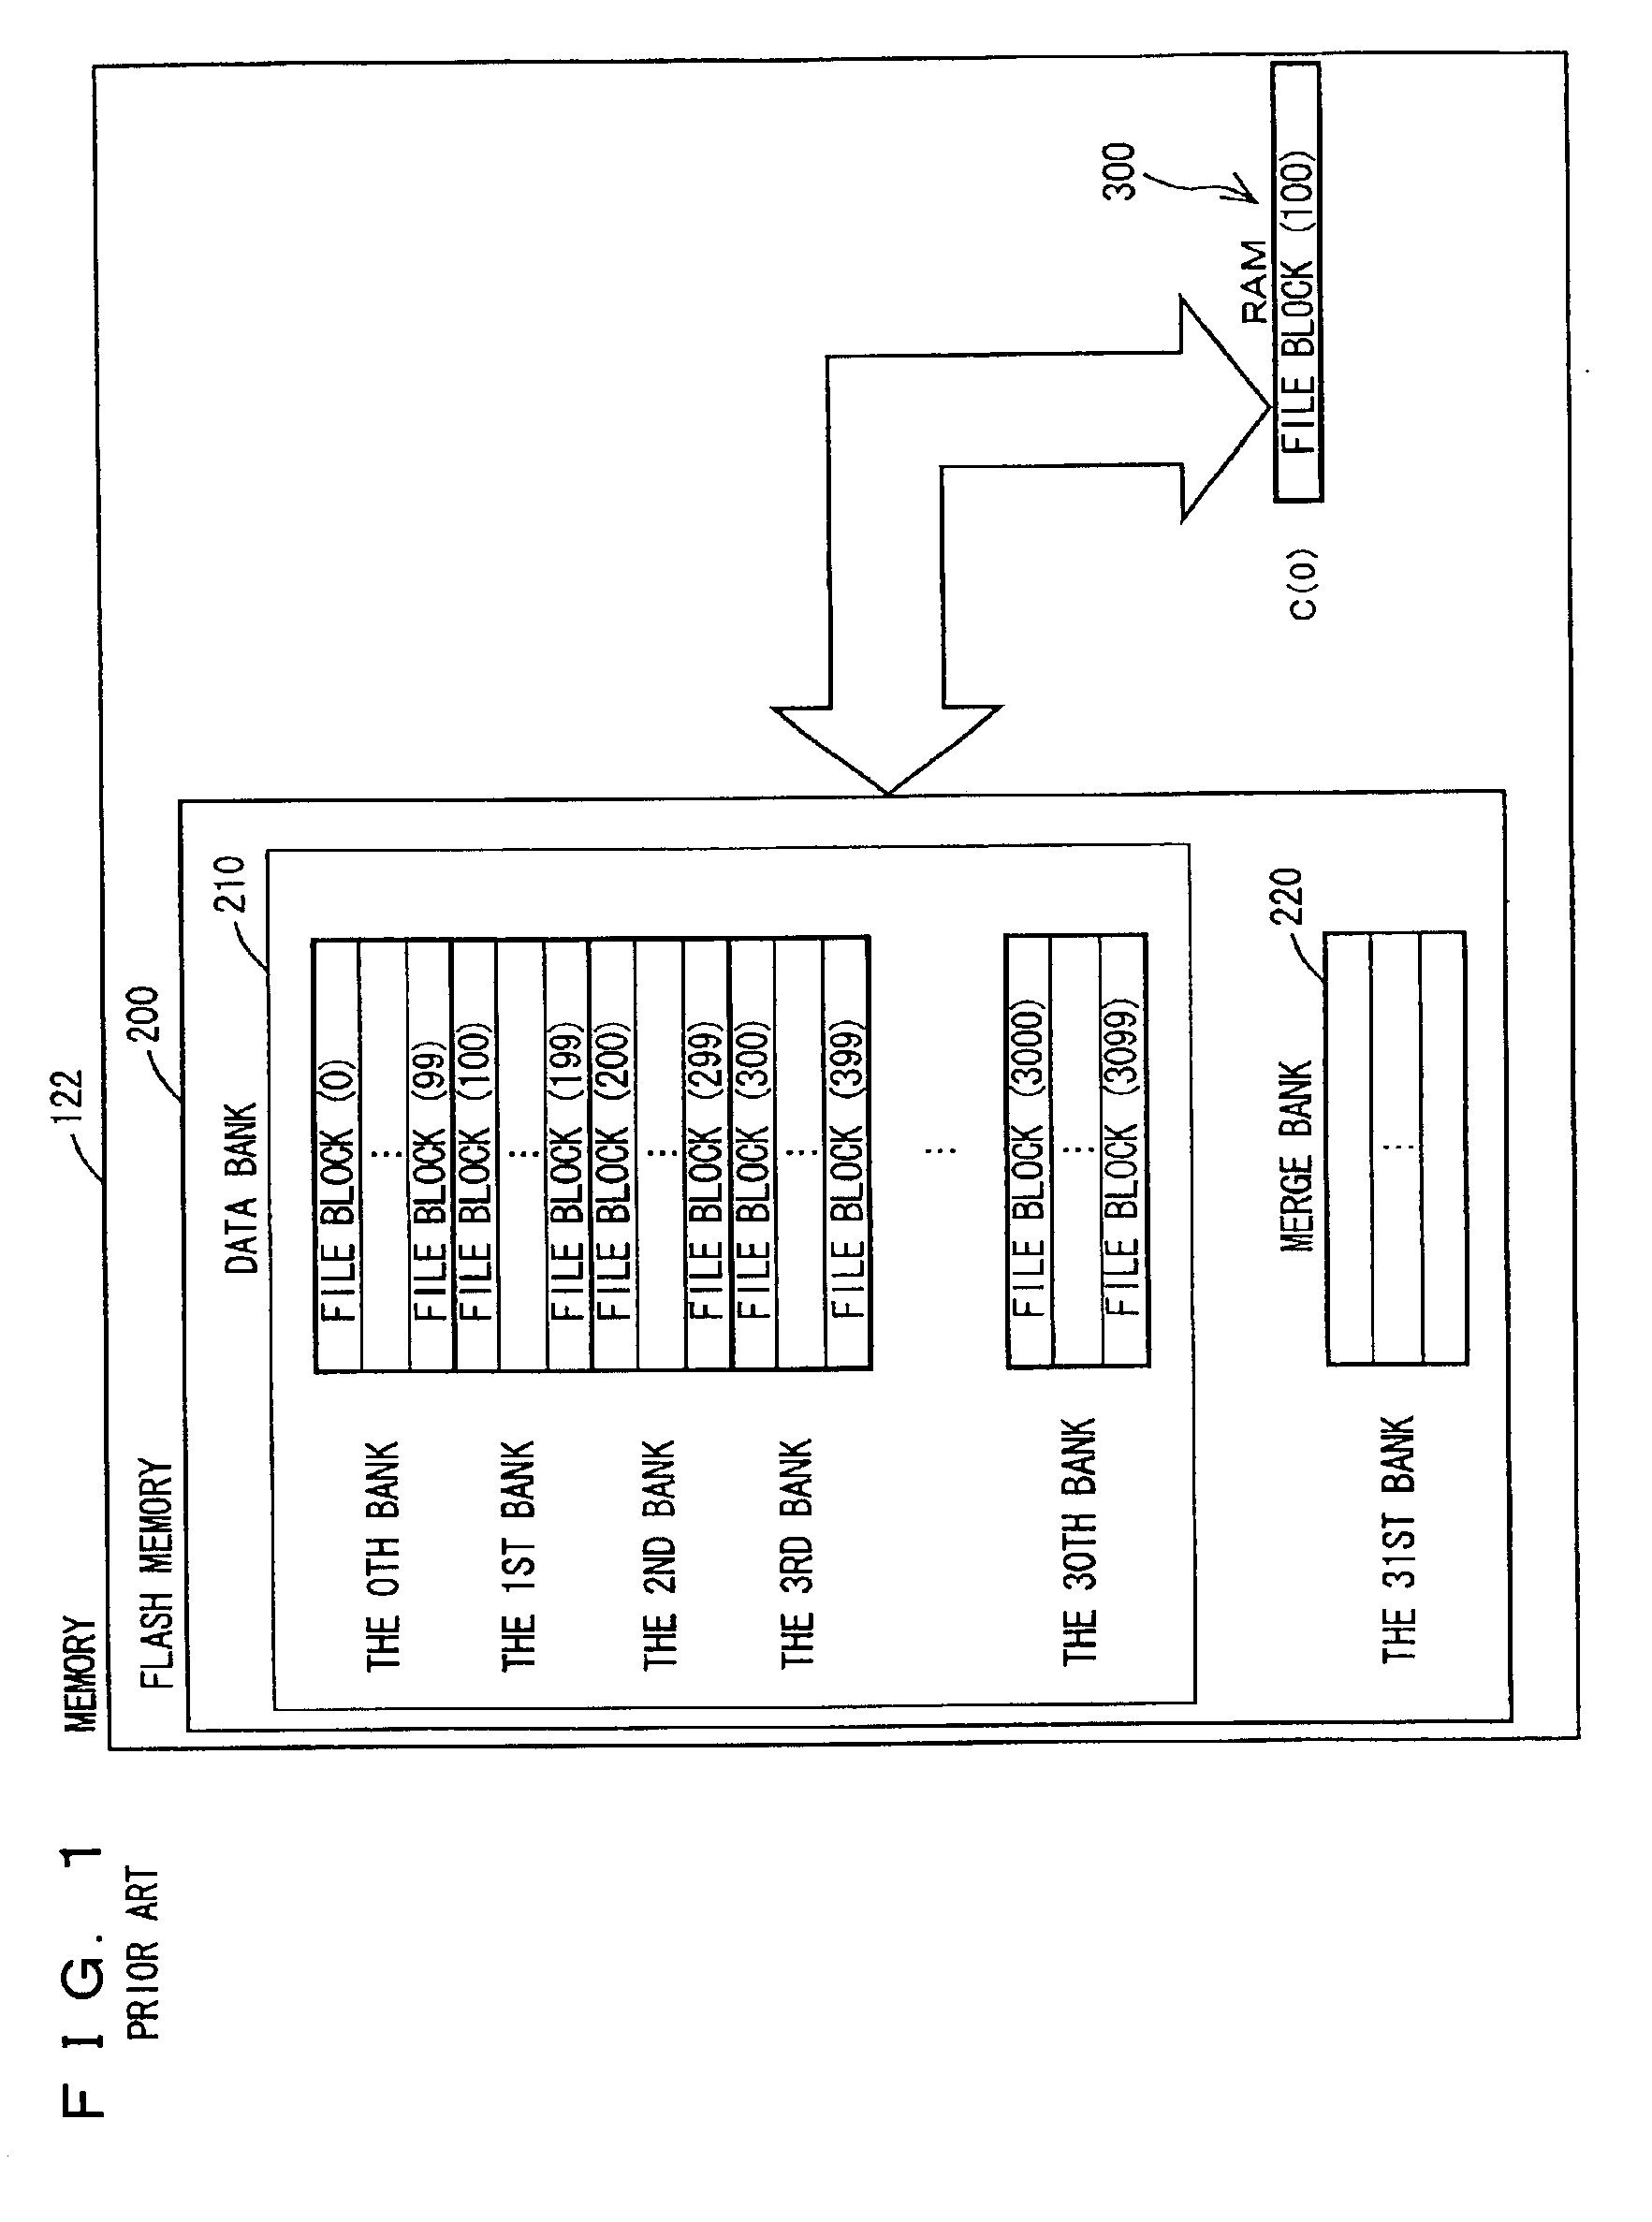 File system including non-volatile semiconductor memory device having a plurality of banks